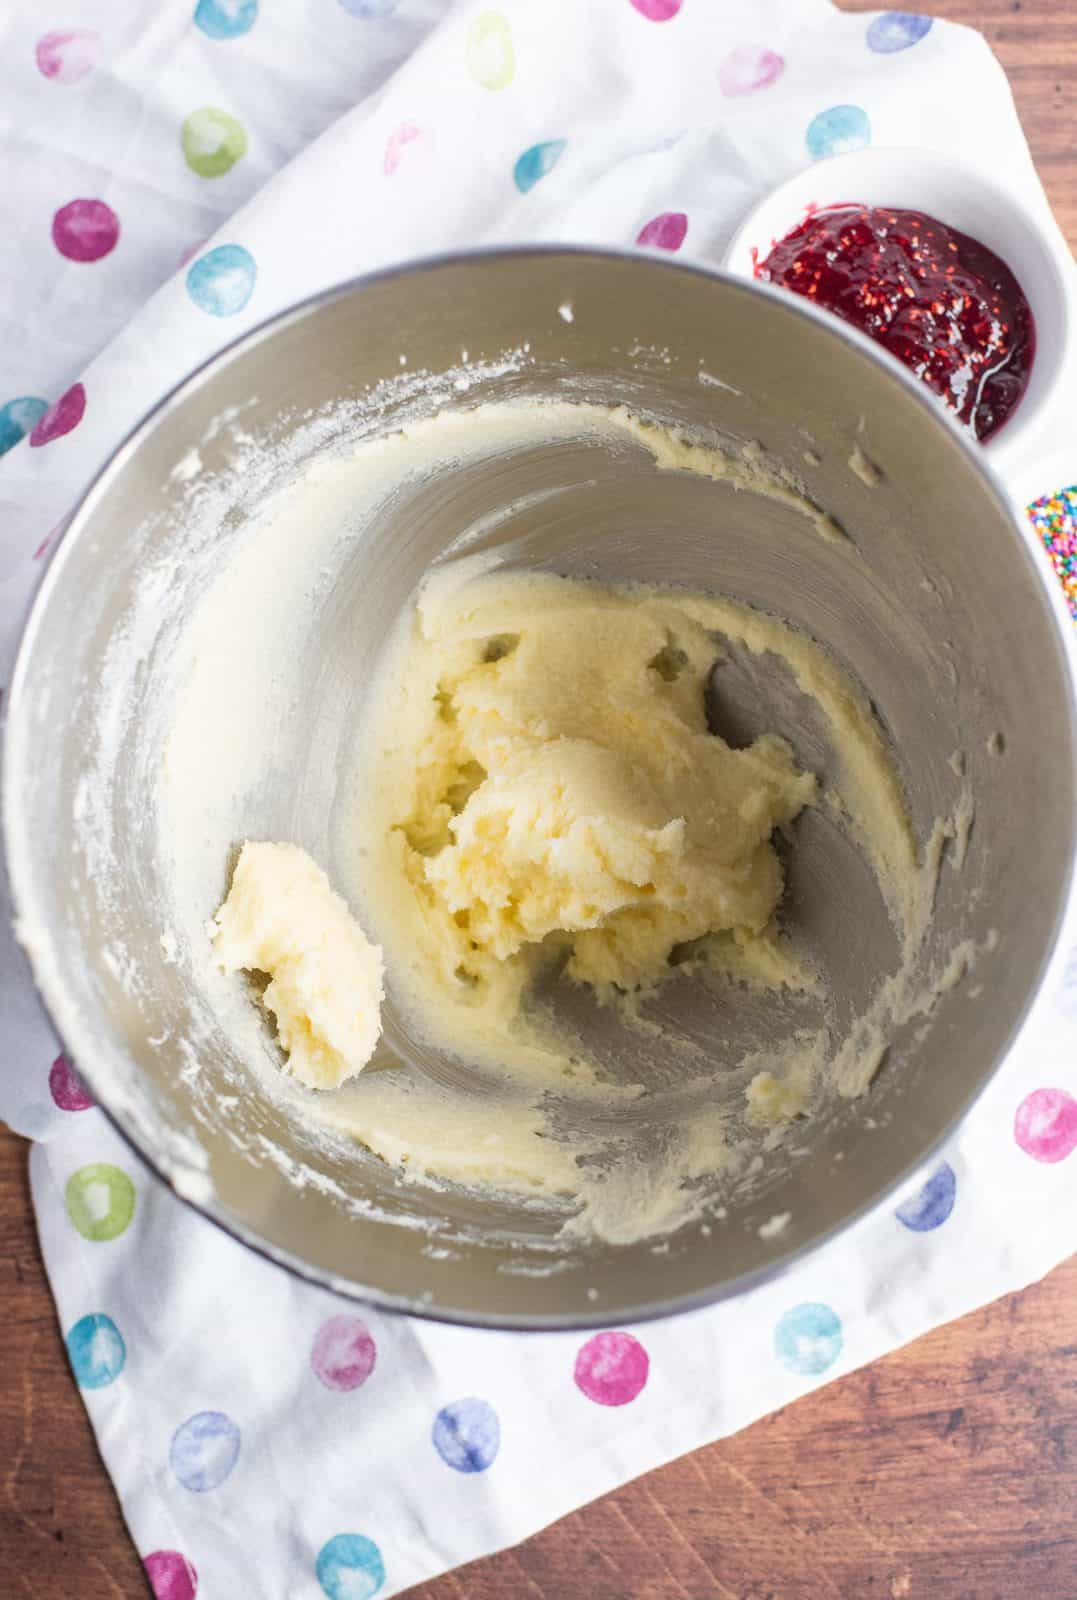 Butter and sugar beaten together in bowl of stand mixer.